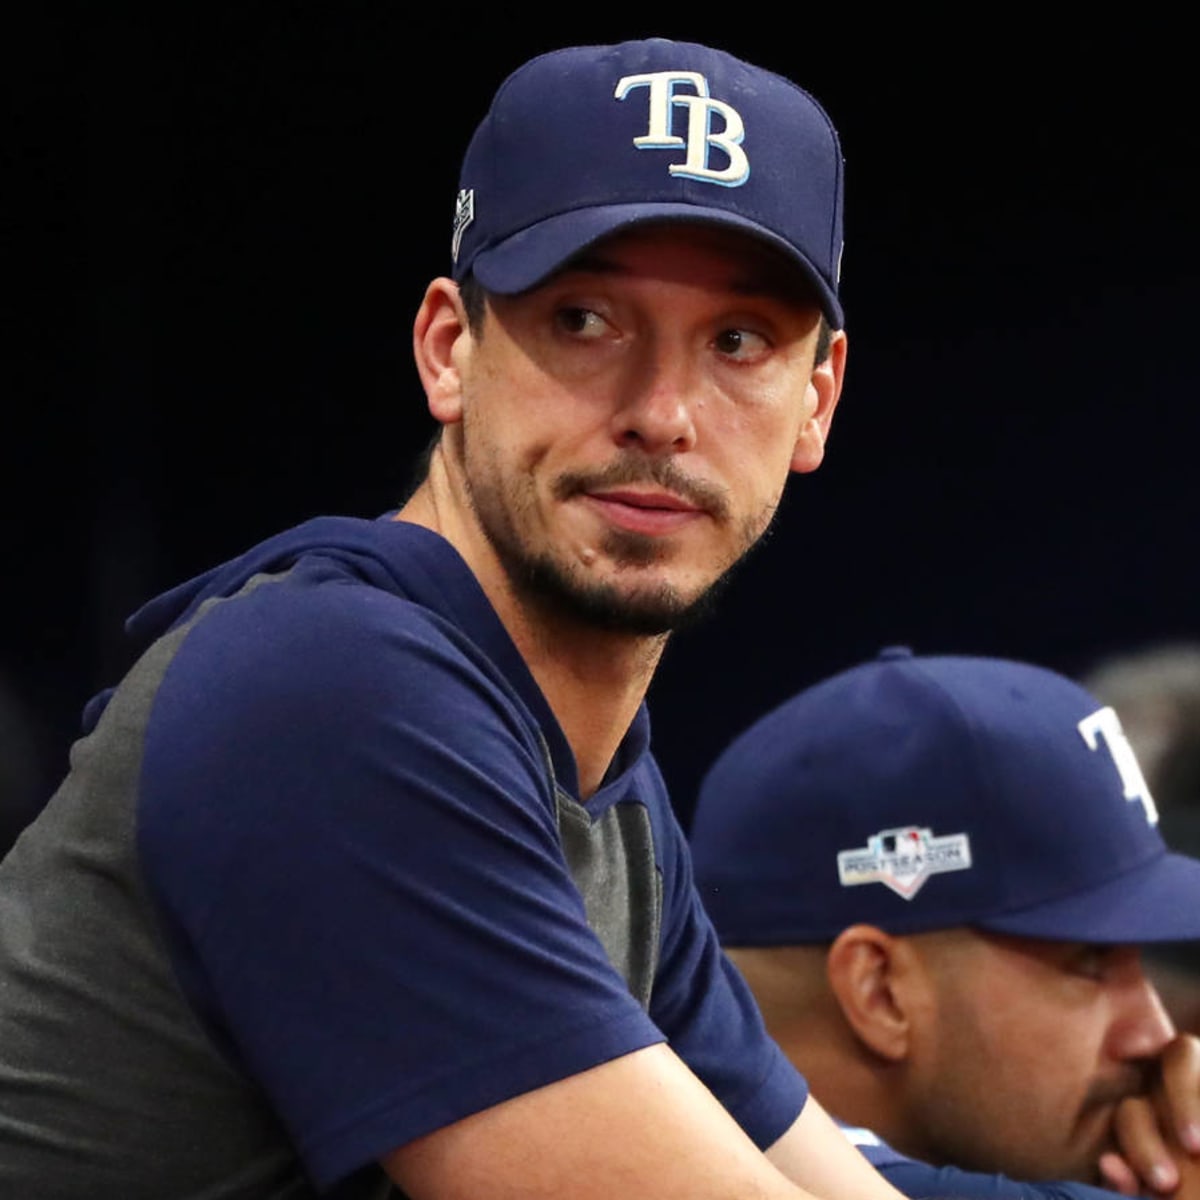 Charlie Morton, a key member of the 2017 Astros, wasn't